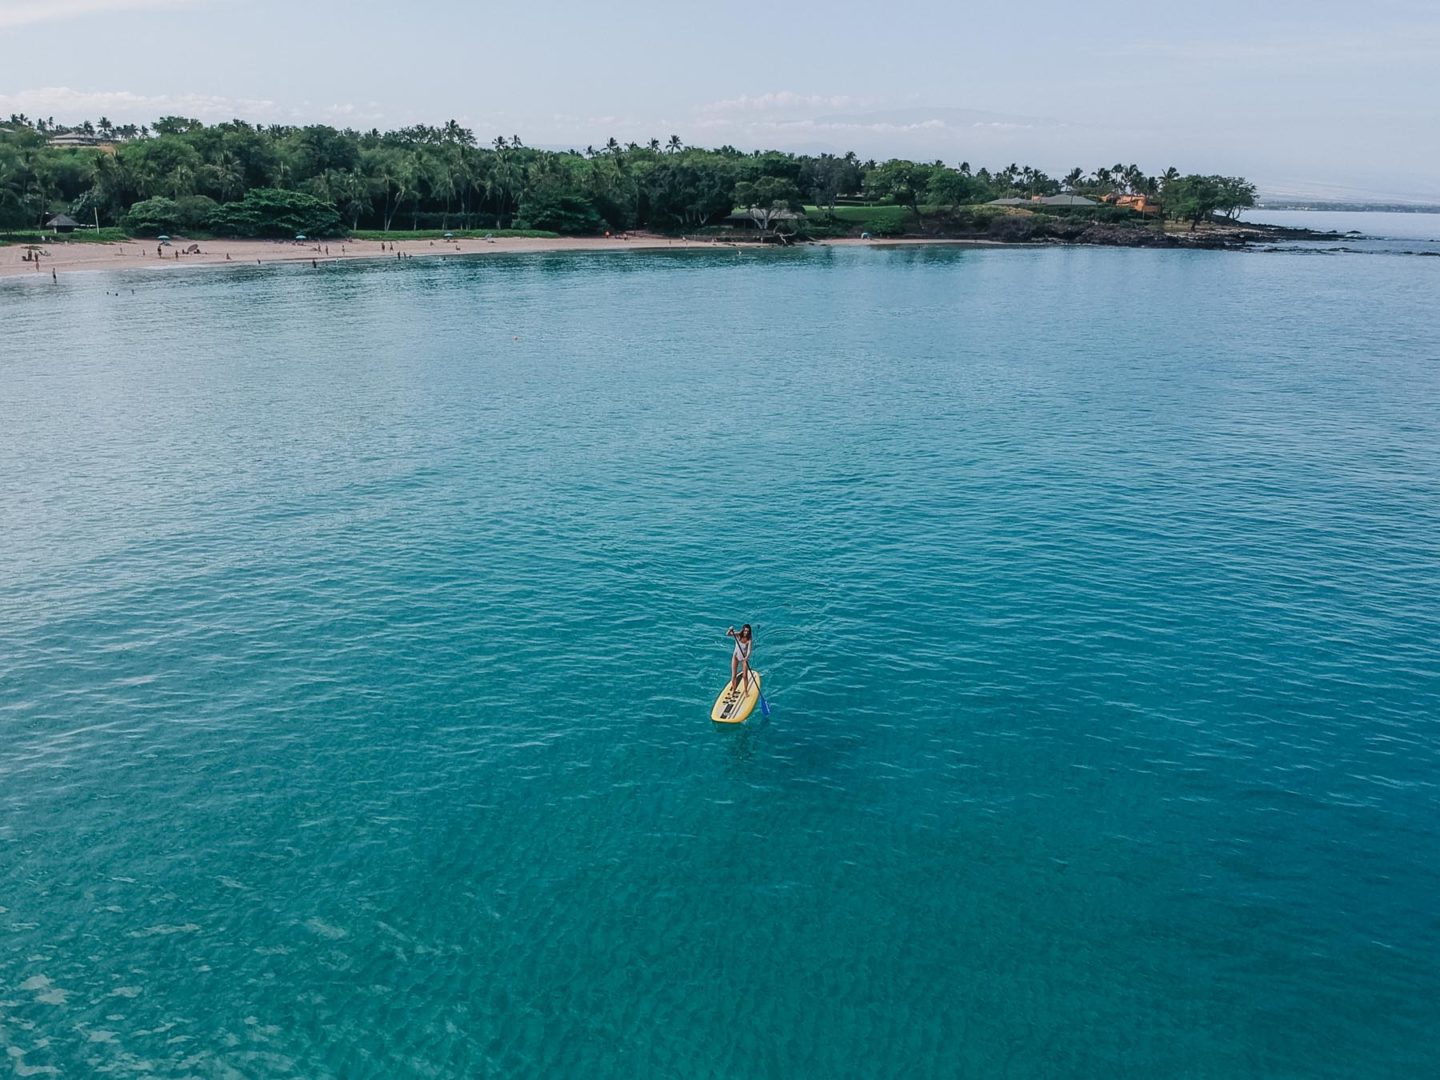 Jess Ann Kirby explores Hawaii with an afternoon paddle boarding on Mauna Kea